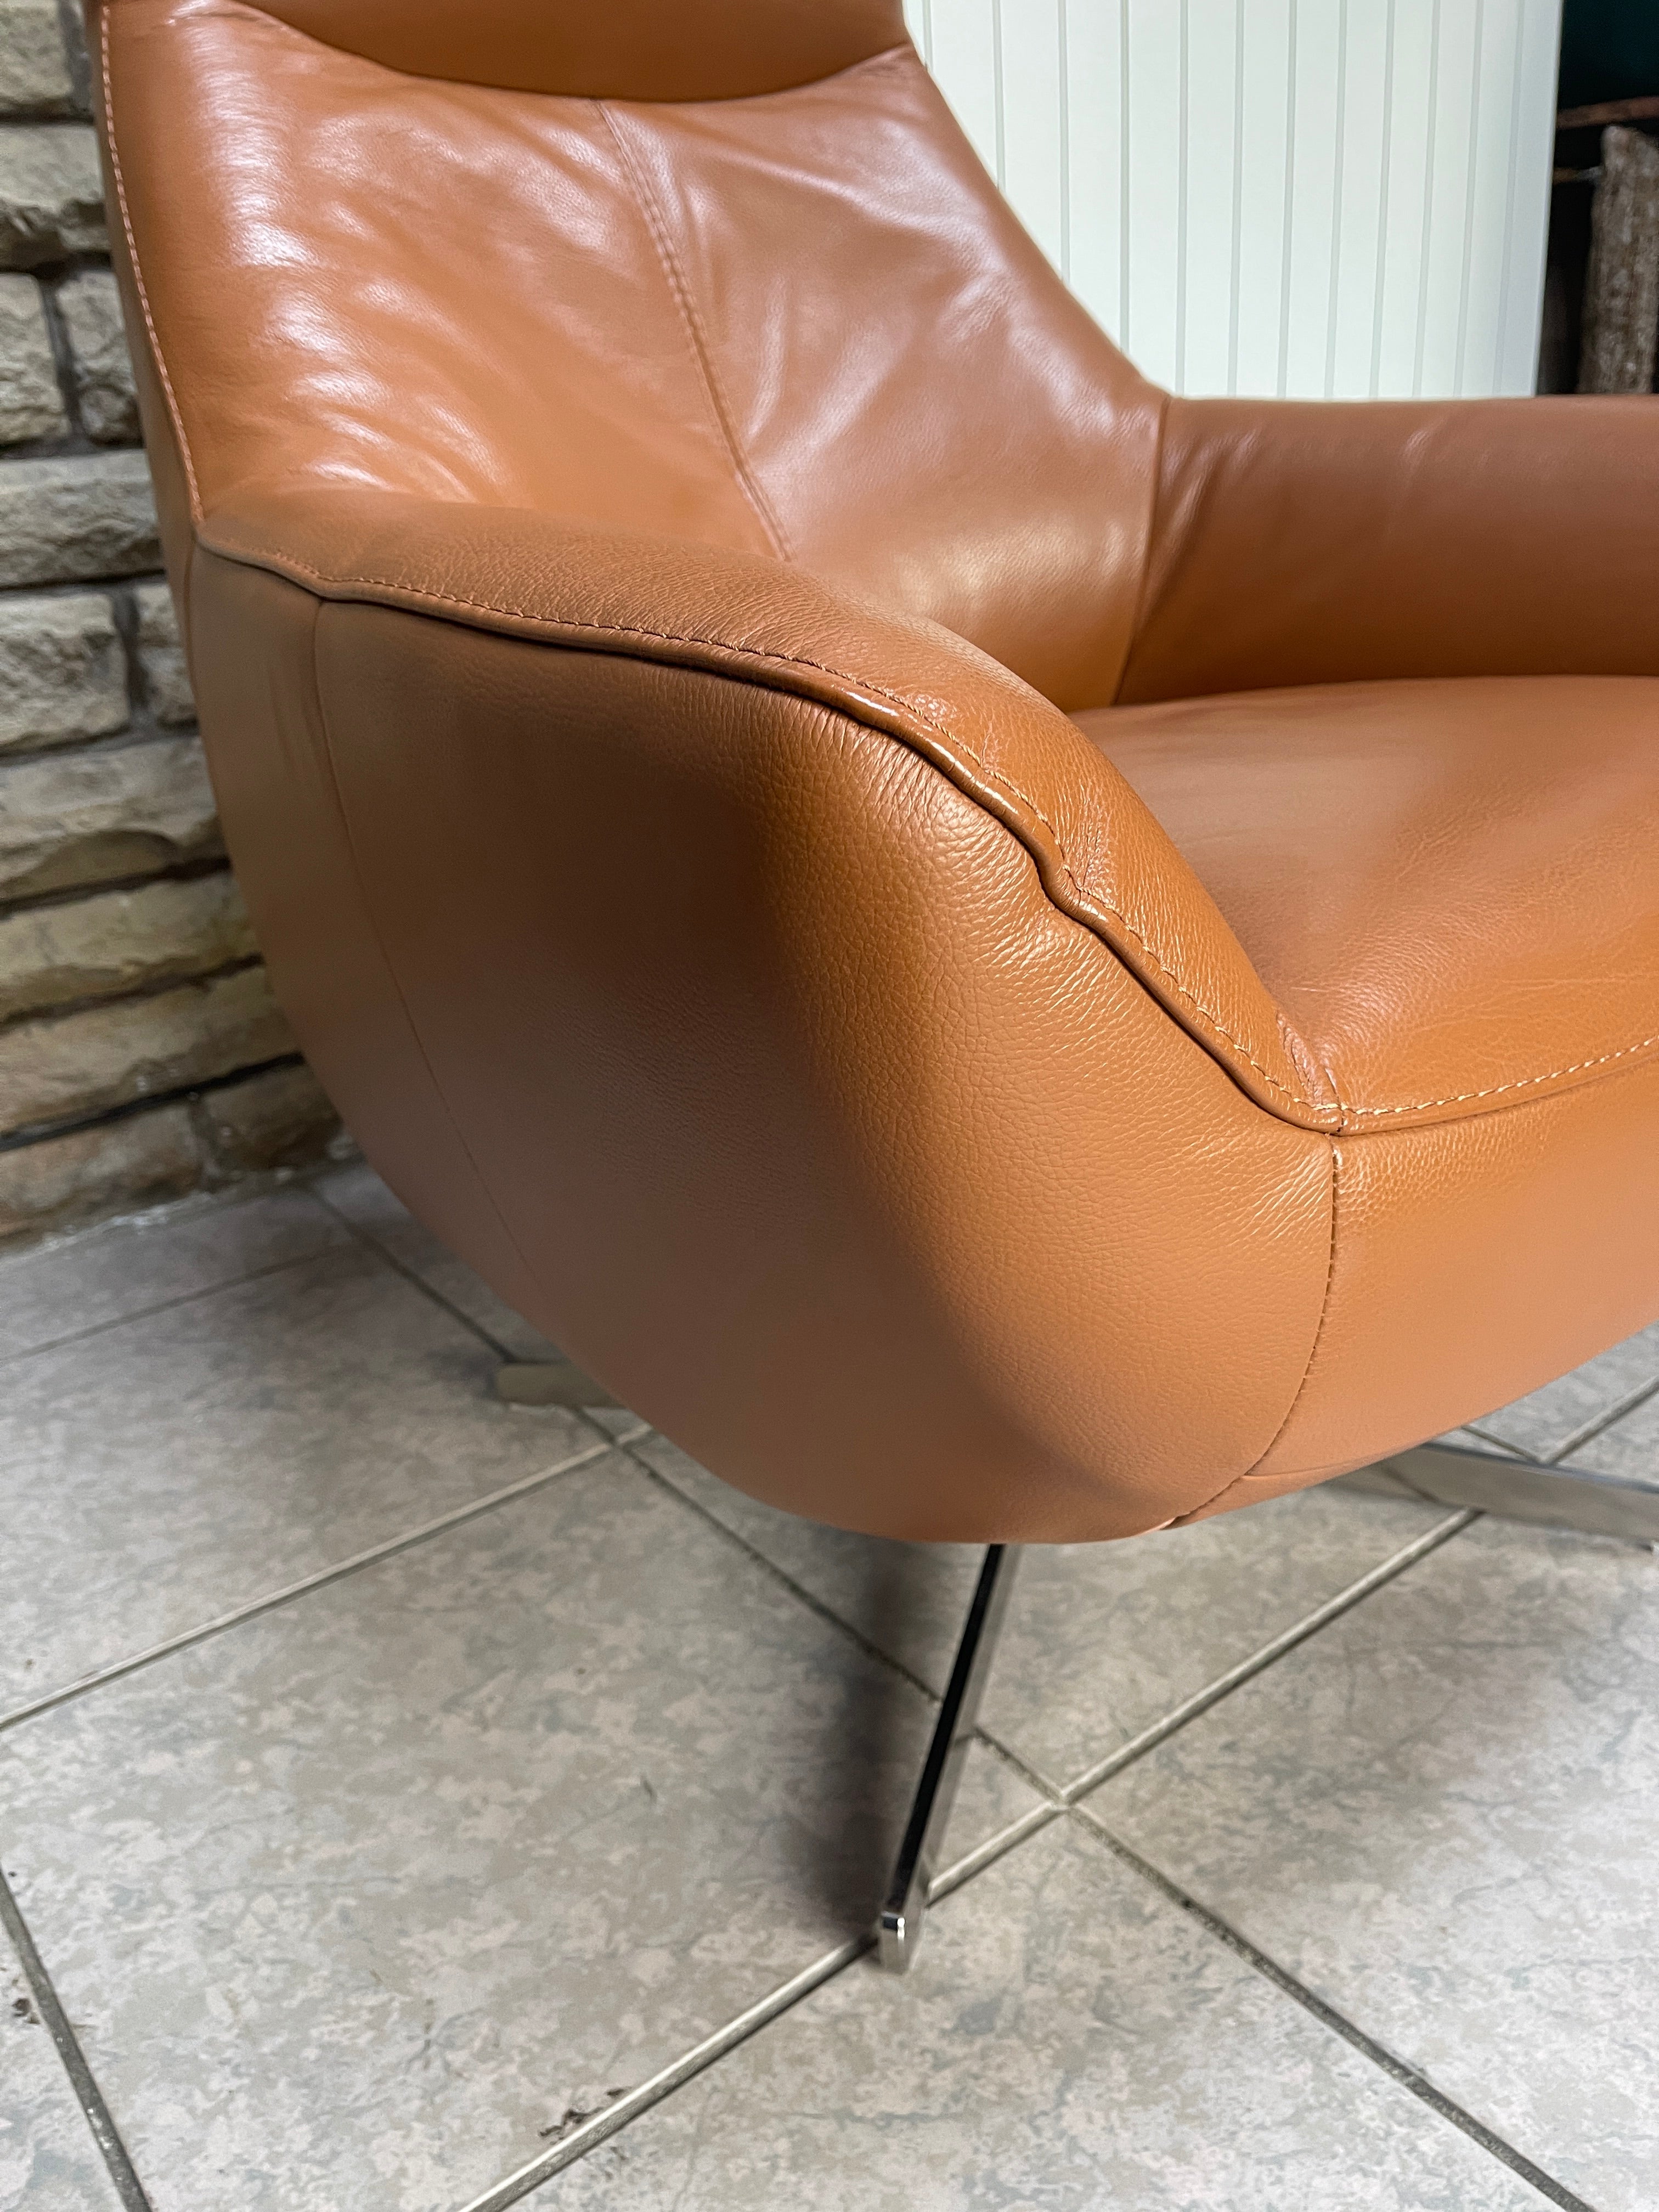 SOFOLOGY GALAXY padded swivel chair in toffee brown leather